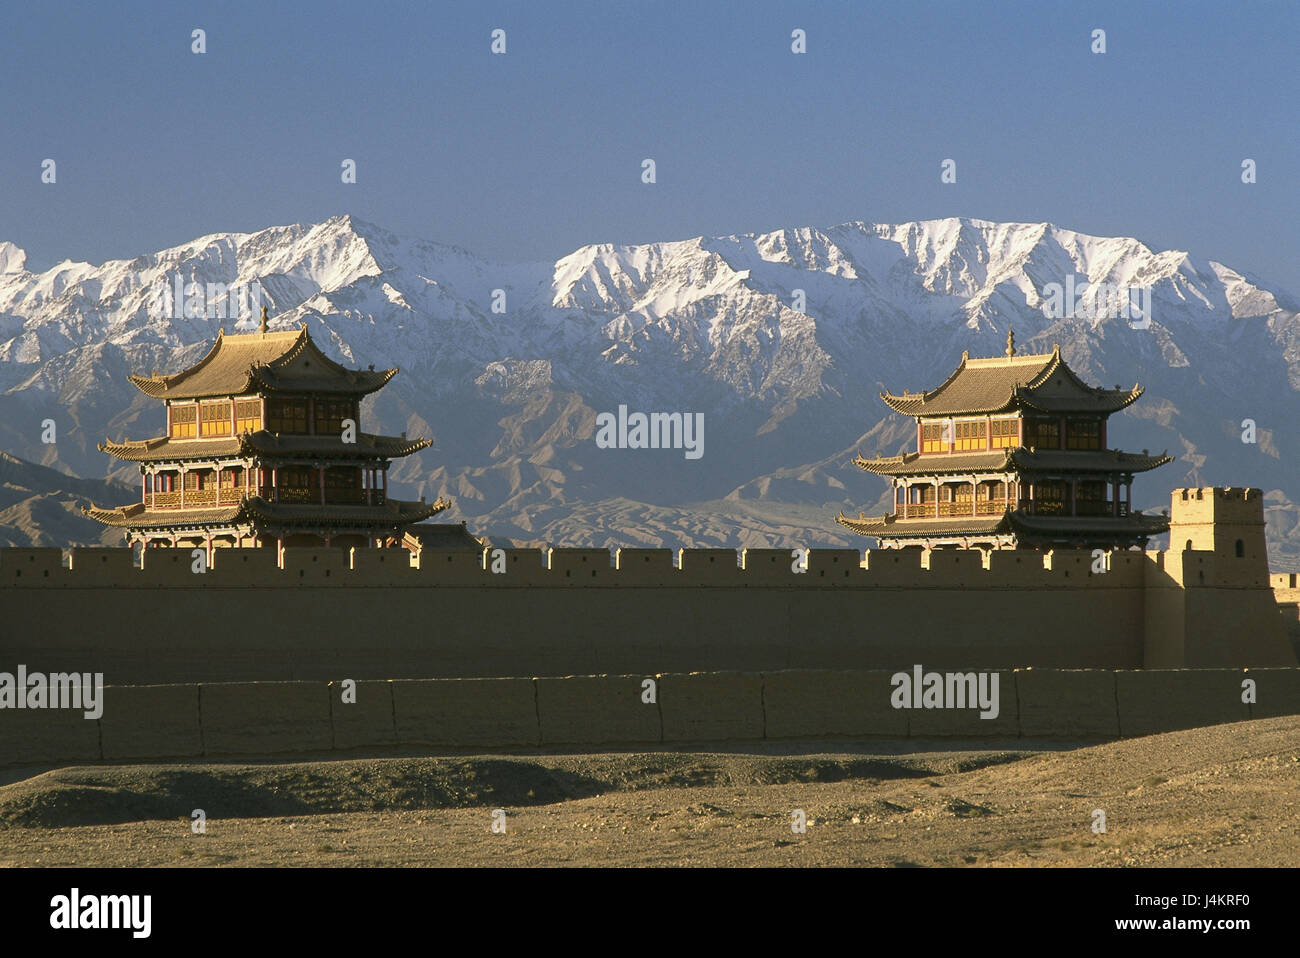 China, Gansu province, fortress Jiayuguan, Qilian mountains Asia, Eastern Asia, place of interest, fort, fortress attachment, the Great Wall of China, further defensive wall, fortress defensive wall, military attachment, building, architecture, historically, UNESCO-world cultural heritage, Silk Road, mountains, snowy Stock Photo